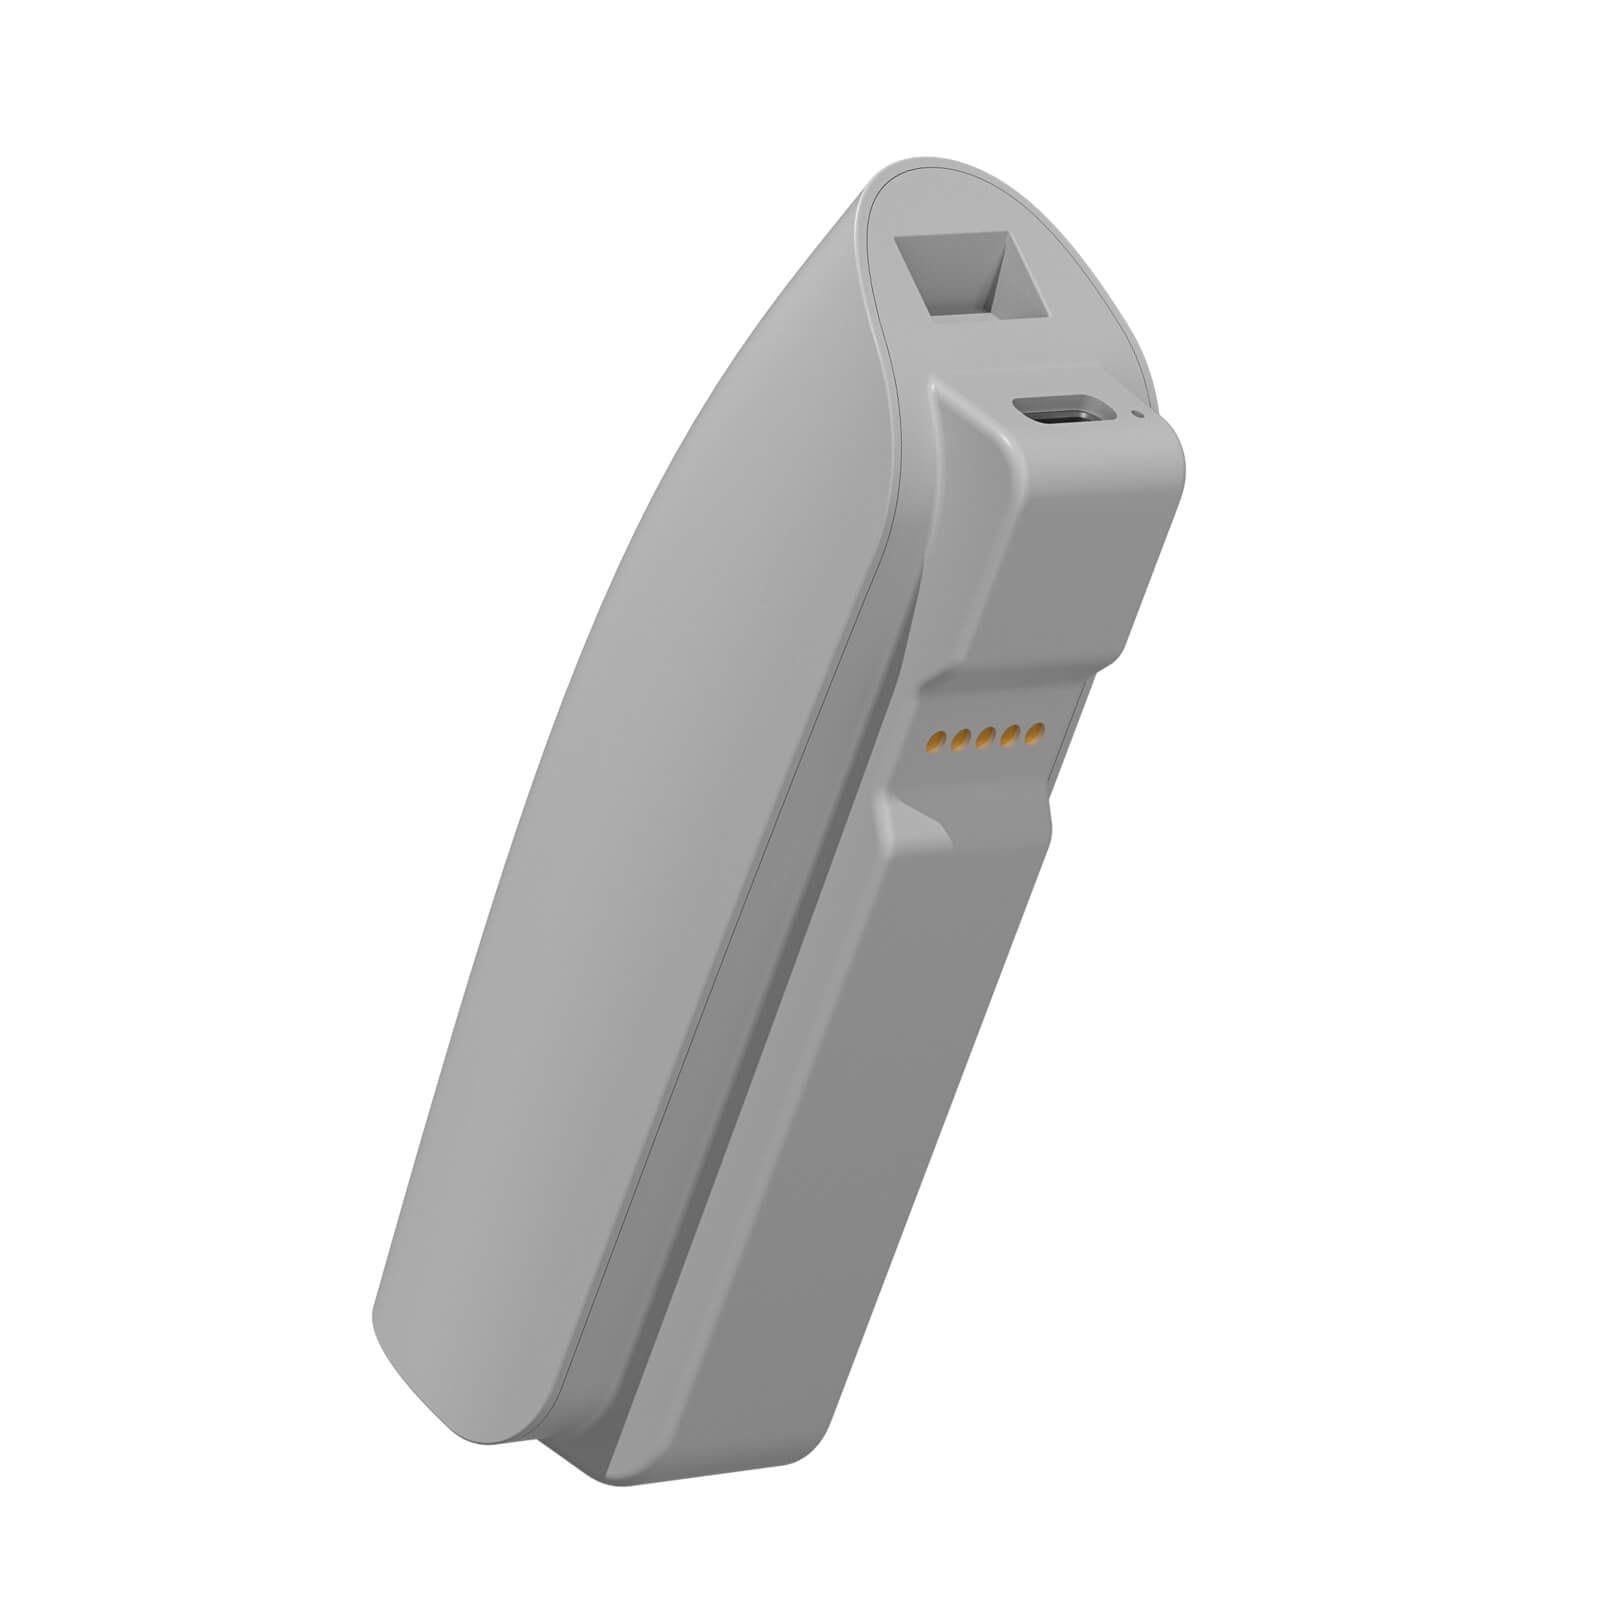 ZyberVR Quick-Charge Neck Power Bank With Swappable Battery